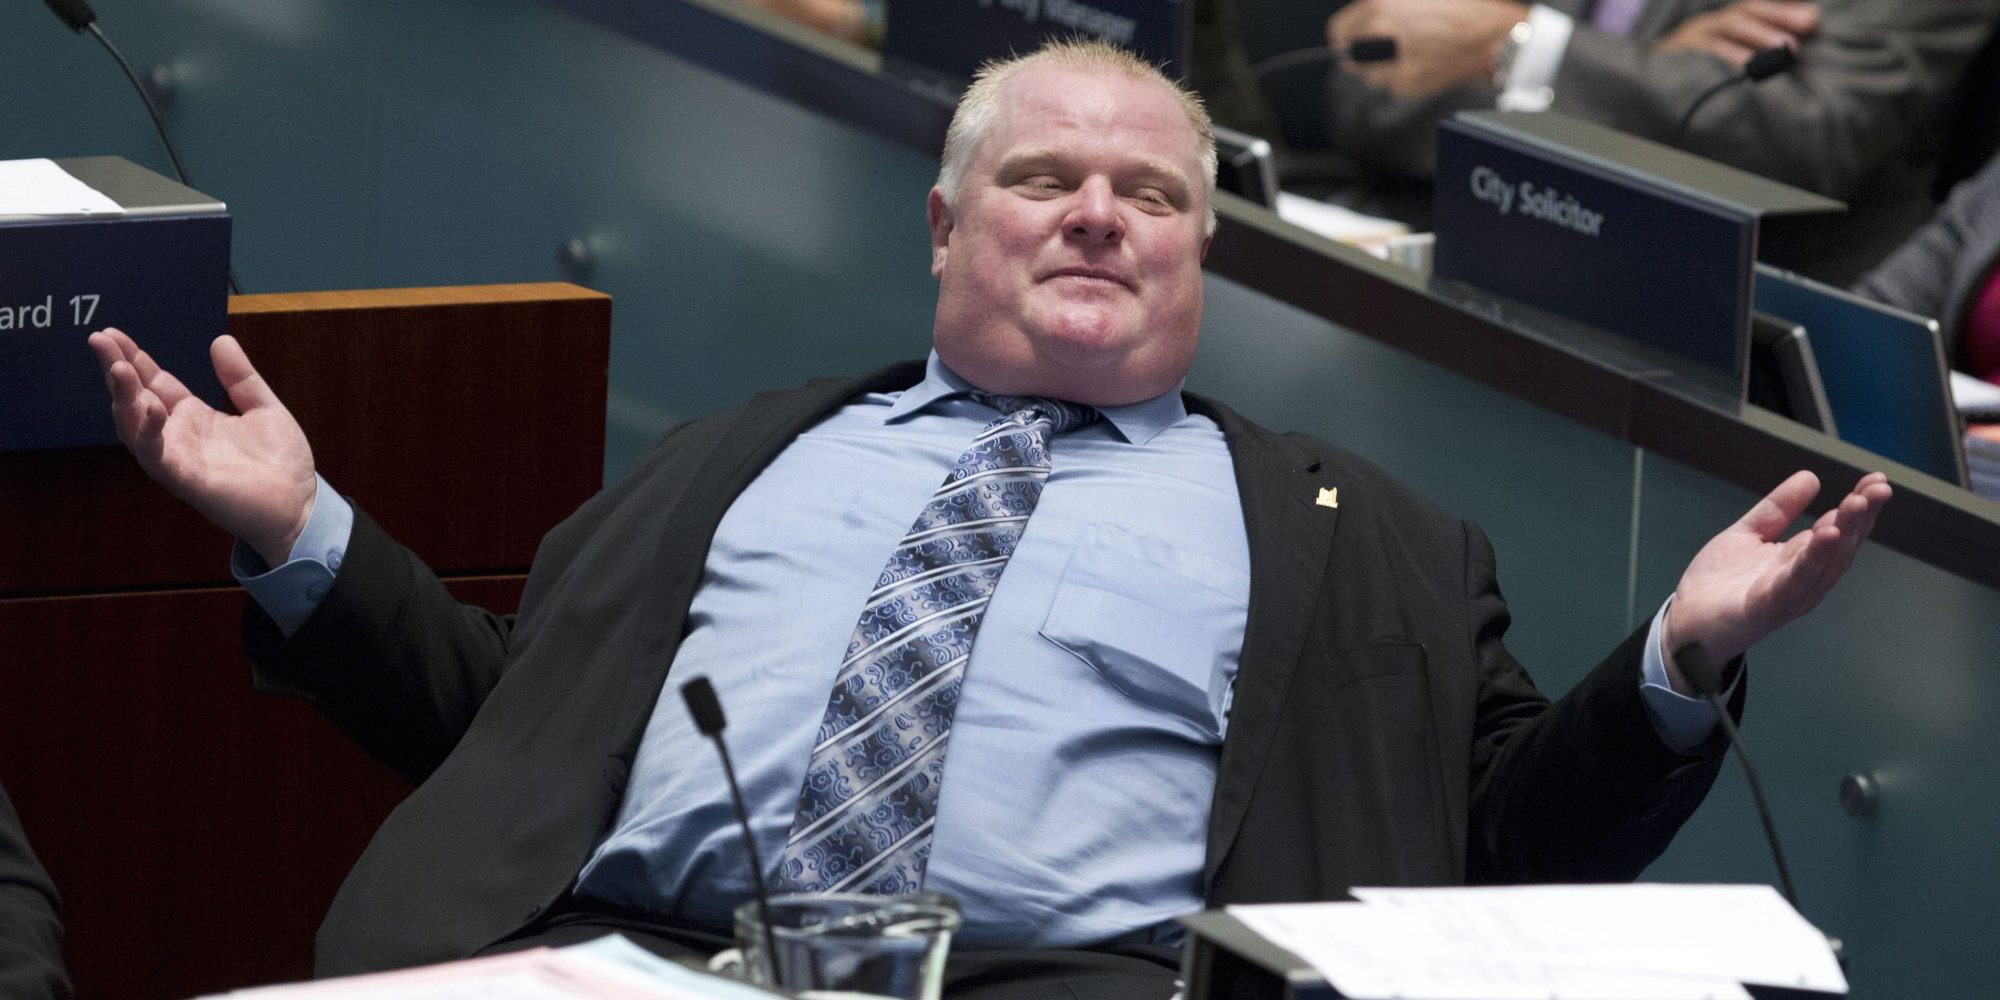 Rob ford city council video #2